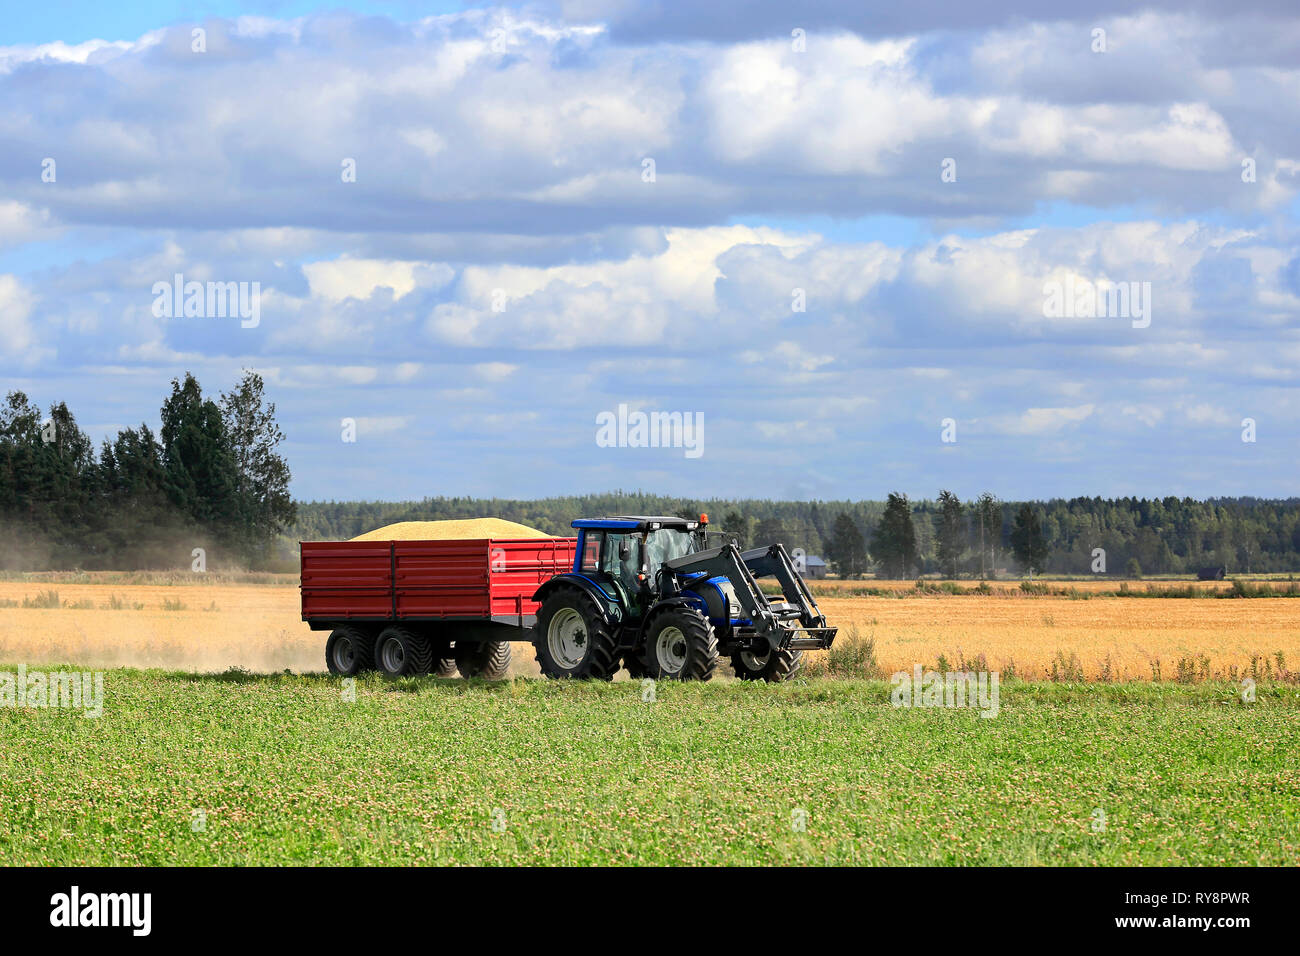 Farm tractor pulls agricultural trailer load of harvested grain along small rural road in Finnish countryside under blue sky and white clouds. Stock Photo